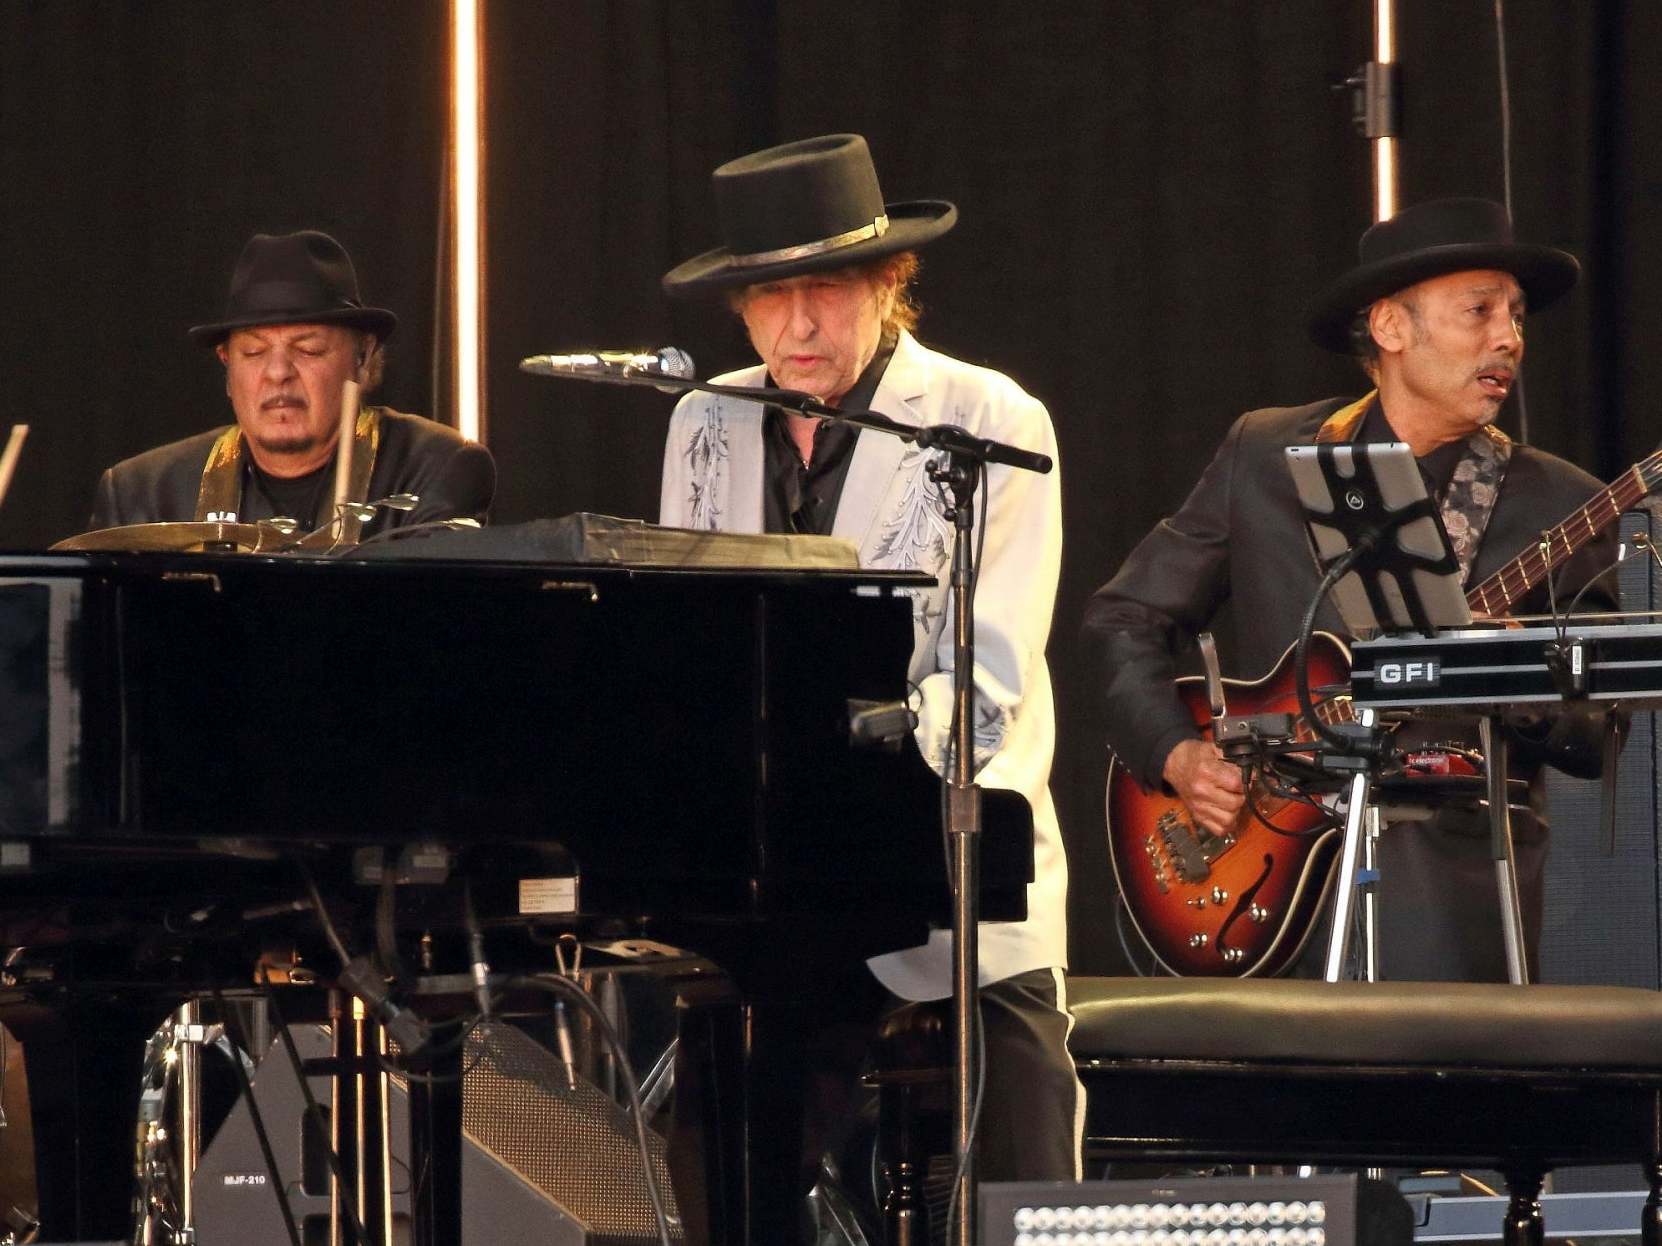 The grizzled man at the piano in a wide-brimmed hat looks like Dylan... (Rex)